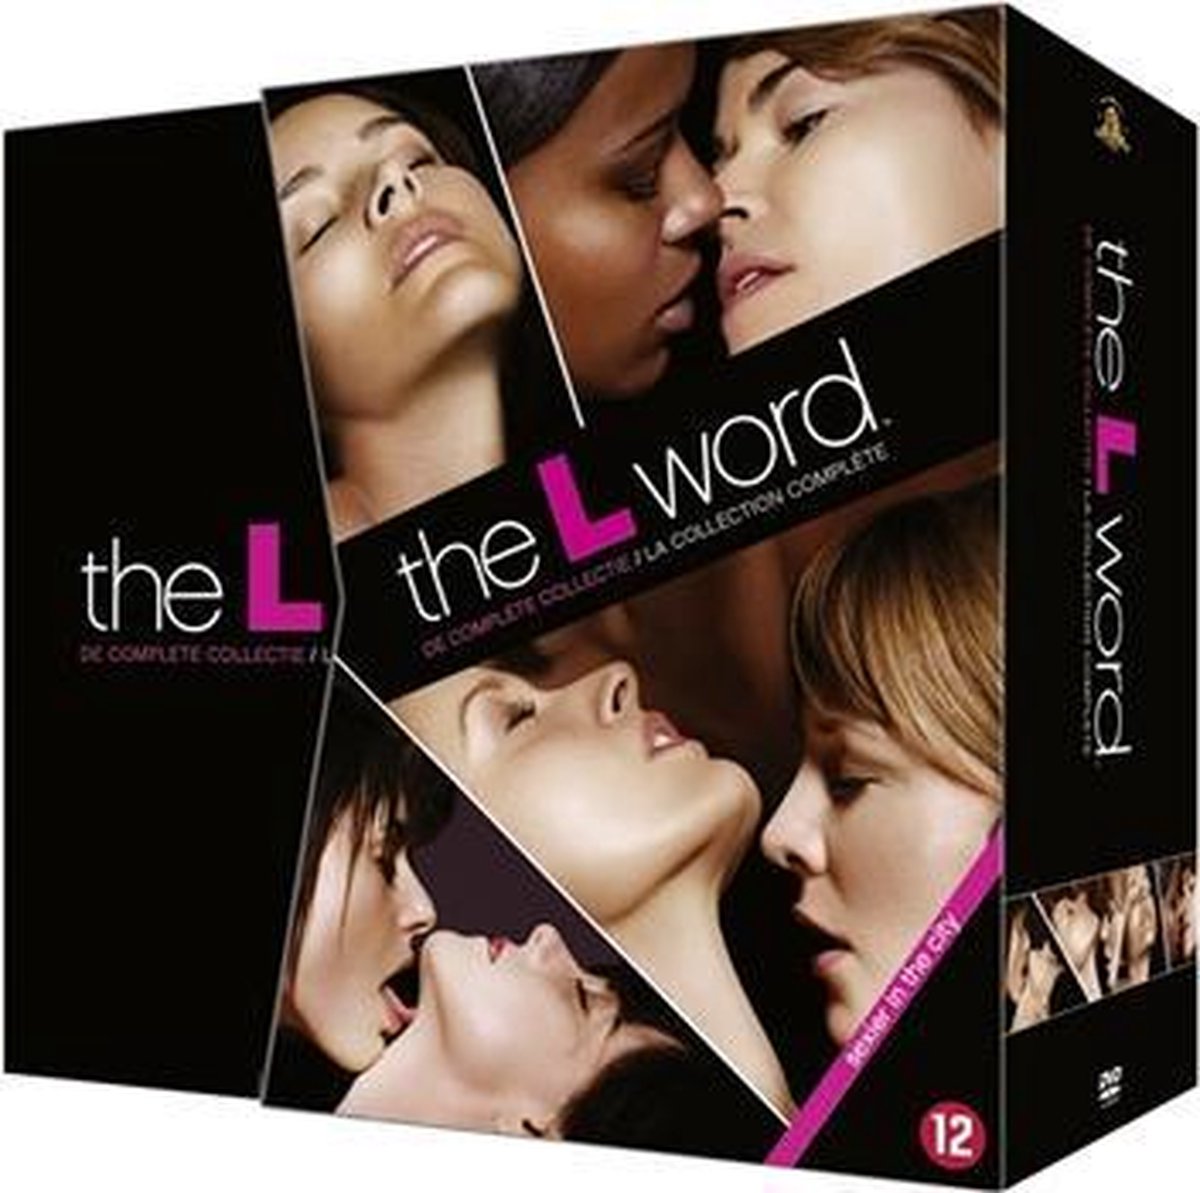 L Word, The - Complete Collectie (Dvd), Erin Daniels | Dvd's | bol.com